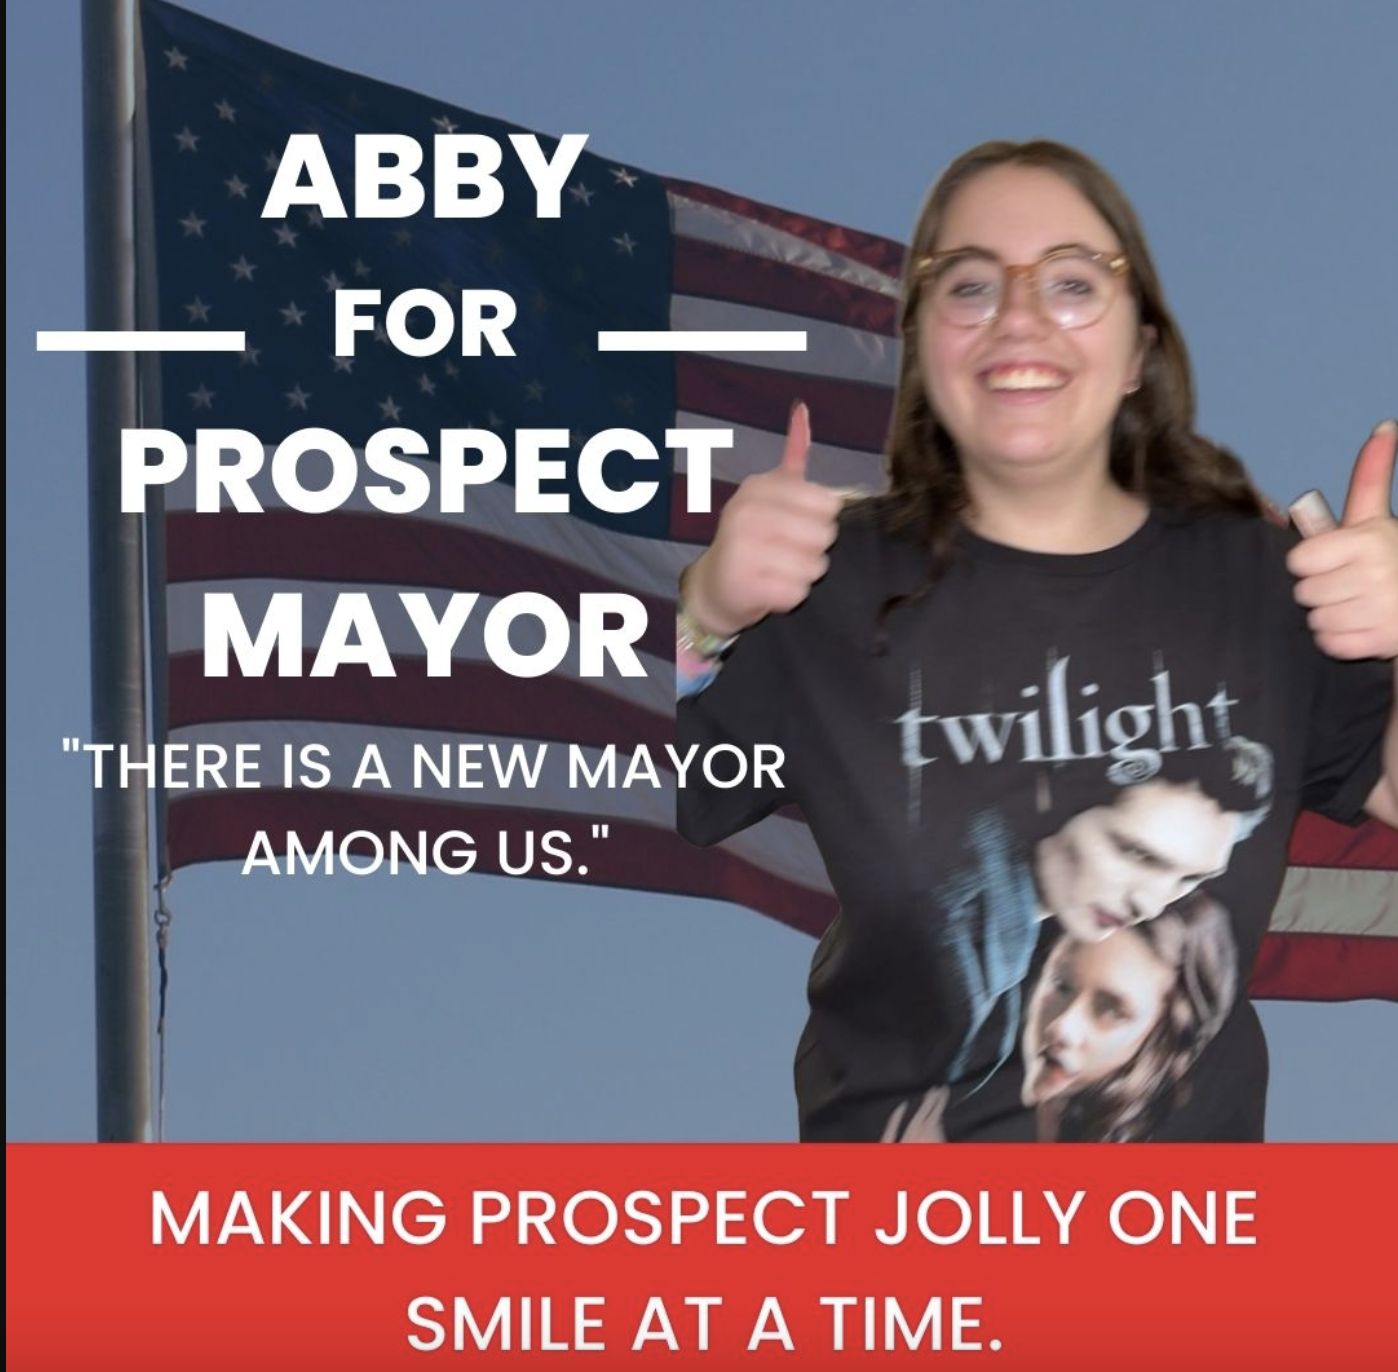 There is a New Prospect Mayor Among Us